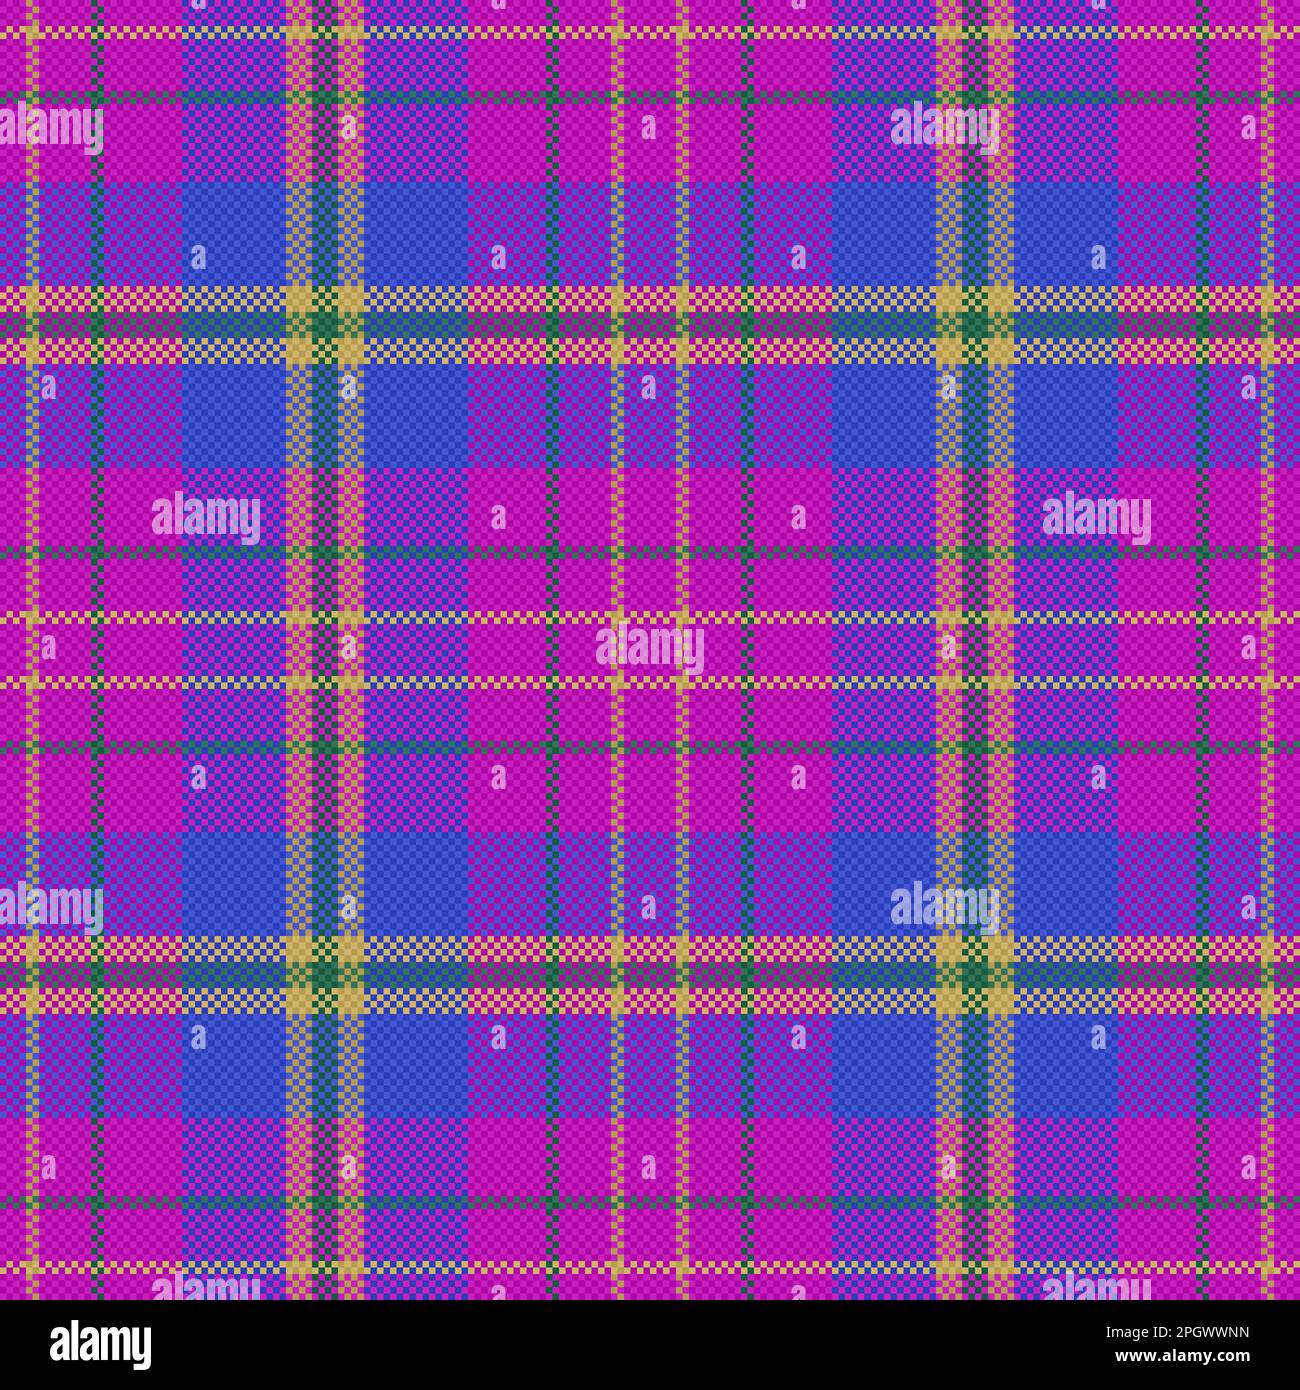 Background texture check. Fabric textile plaid. Pattern vector seamless tartan in violet and blue colors. Stock Vector